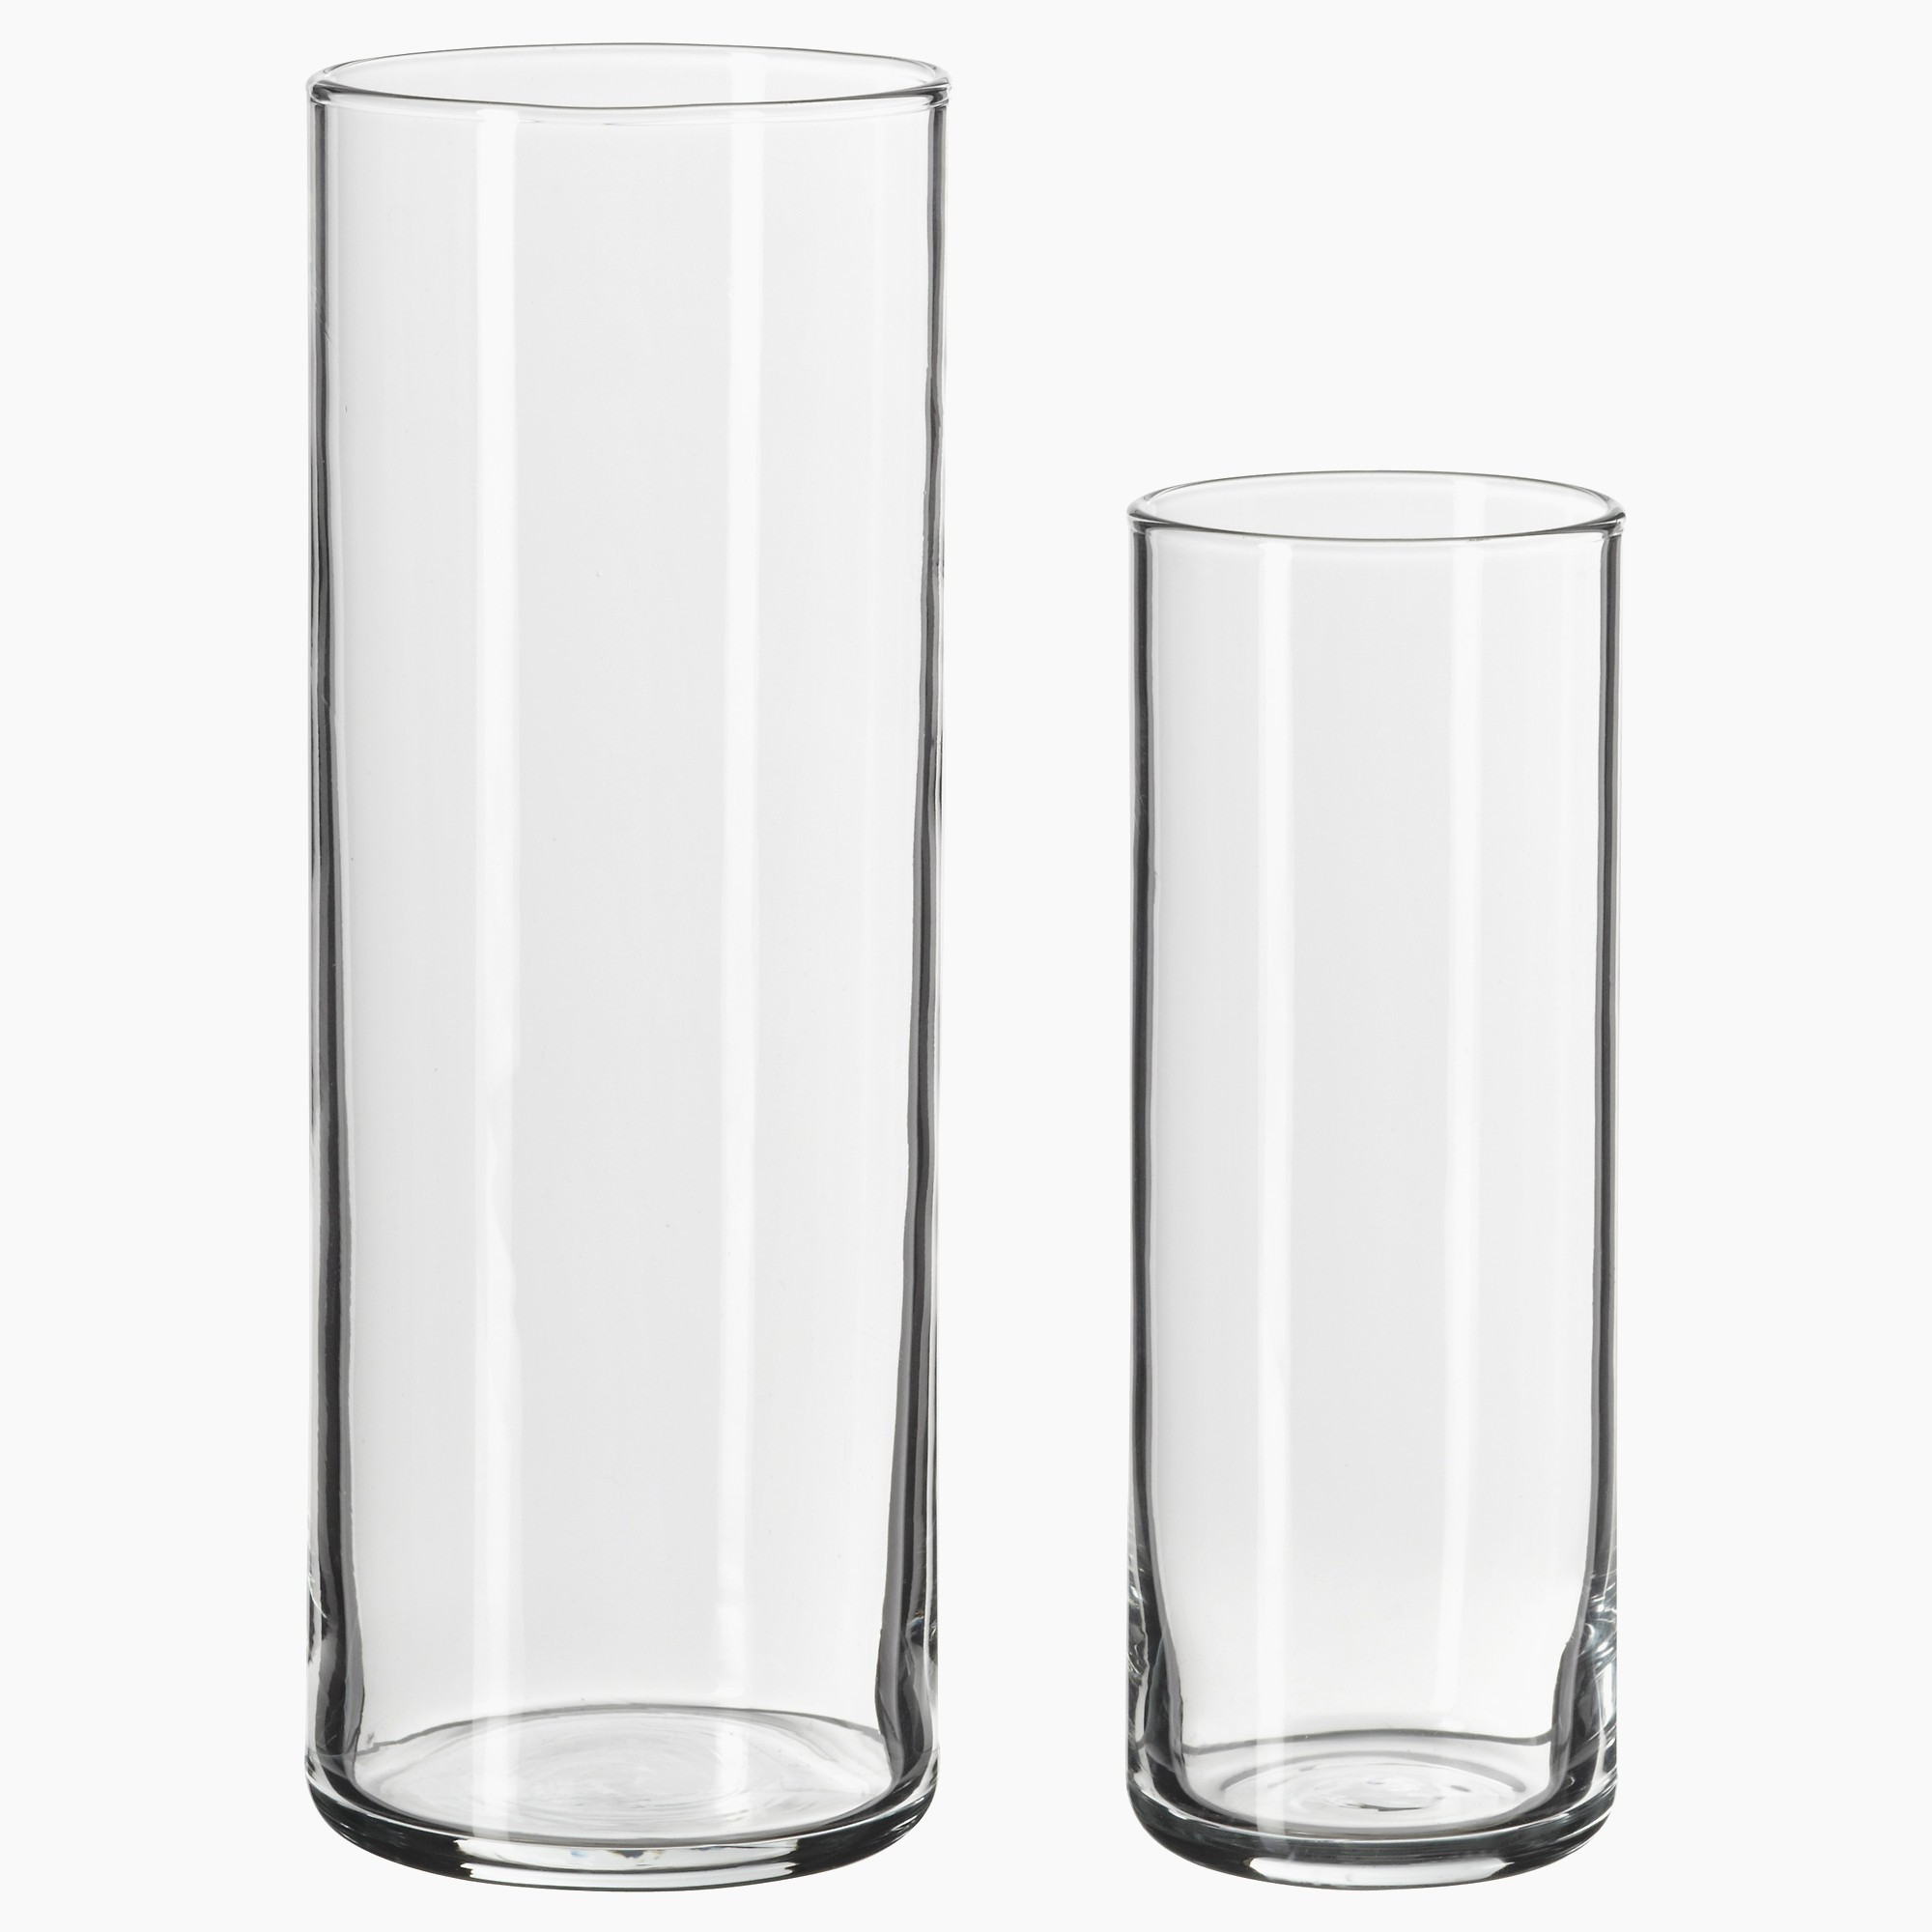 17 Fabulous 40 Inch Tall Glass Cylinder Vases 2024 free download 40 inch tall glass cylinder vases of floor vases ikea collection white floor vase ceramic modern 40 inchl with floor vases ikea collection white floor vase ceramic modern 40 inchl home desig